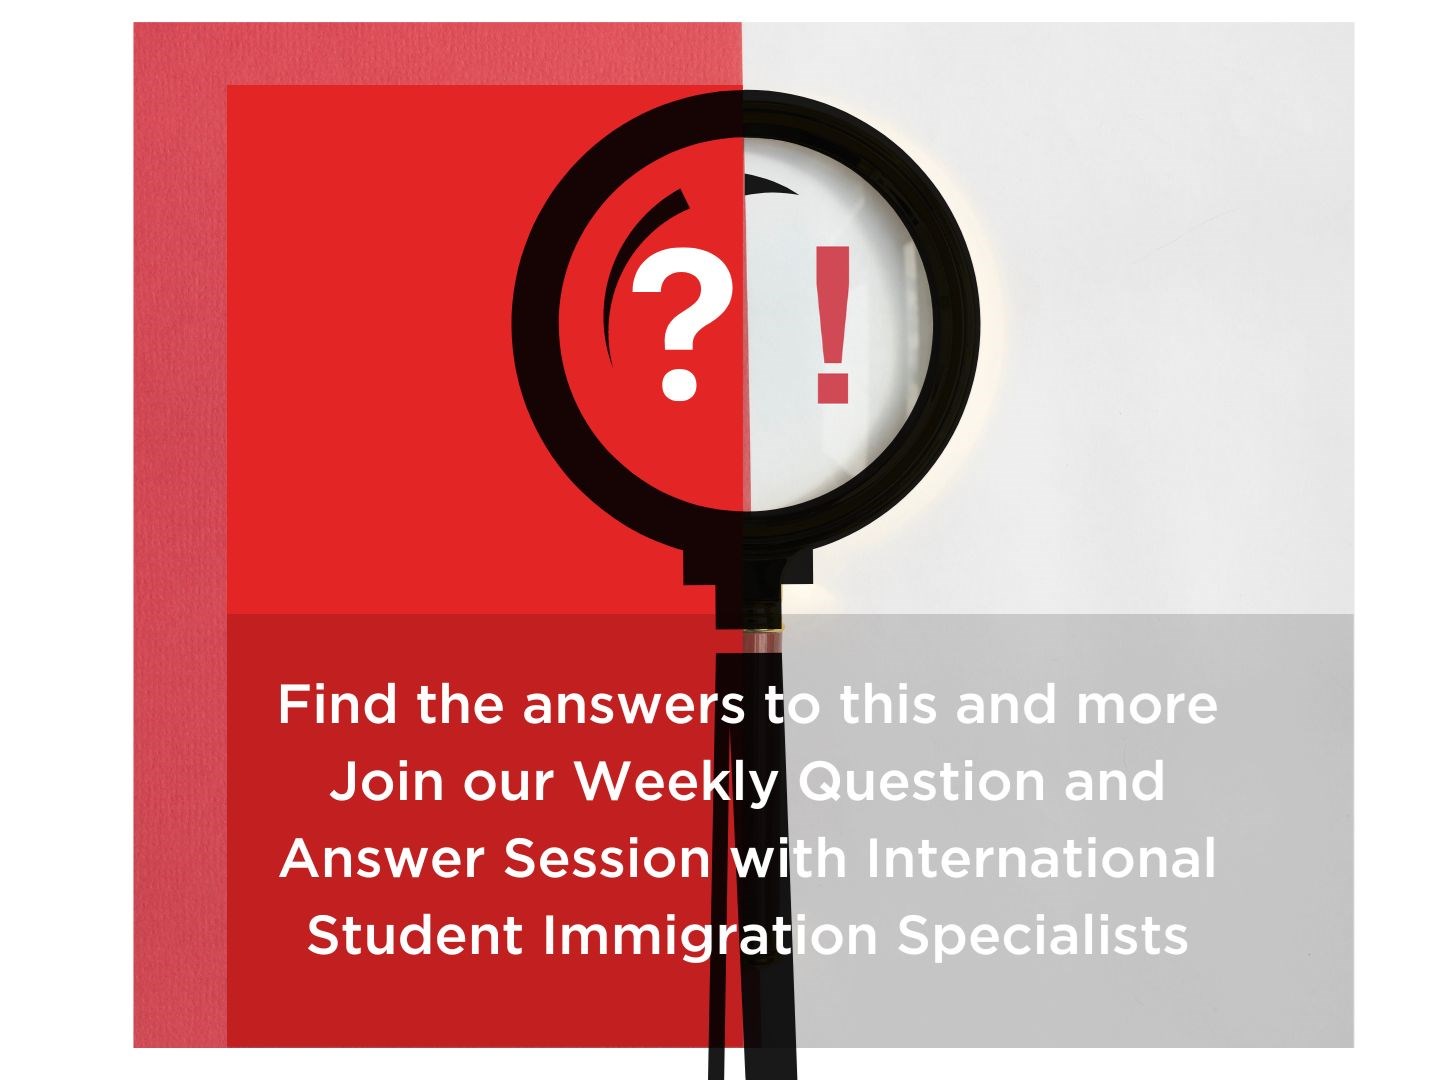 Weekly Question and Answer Session with International Student Immigration Specialists